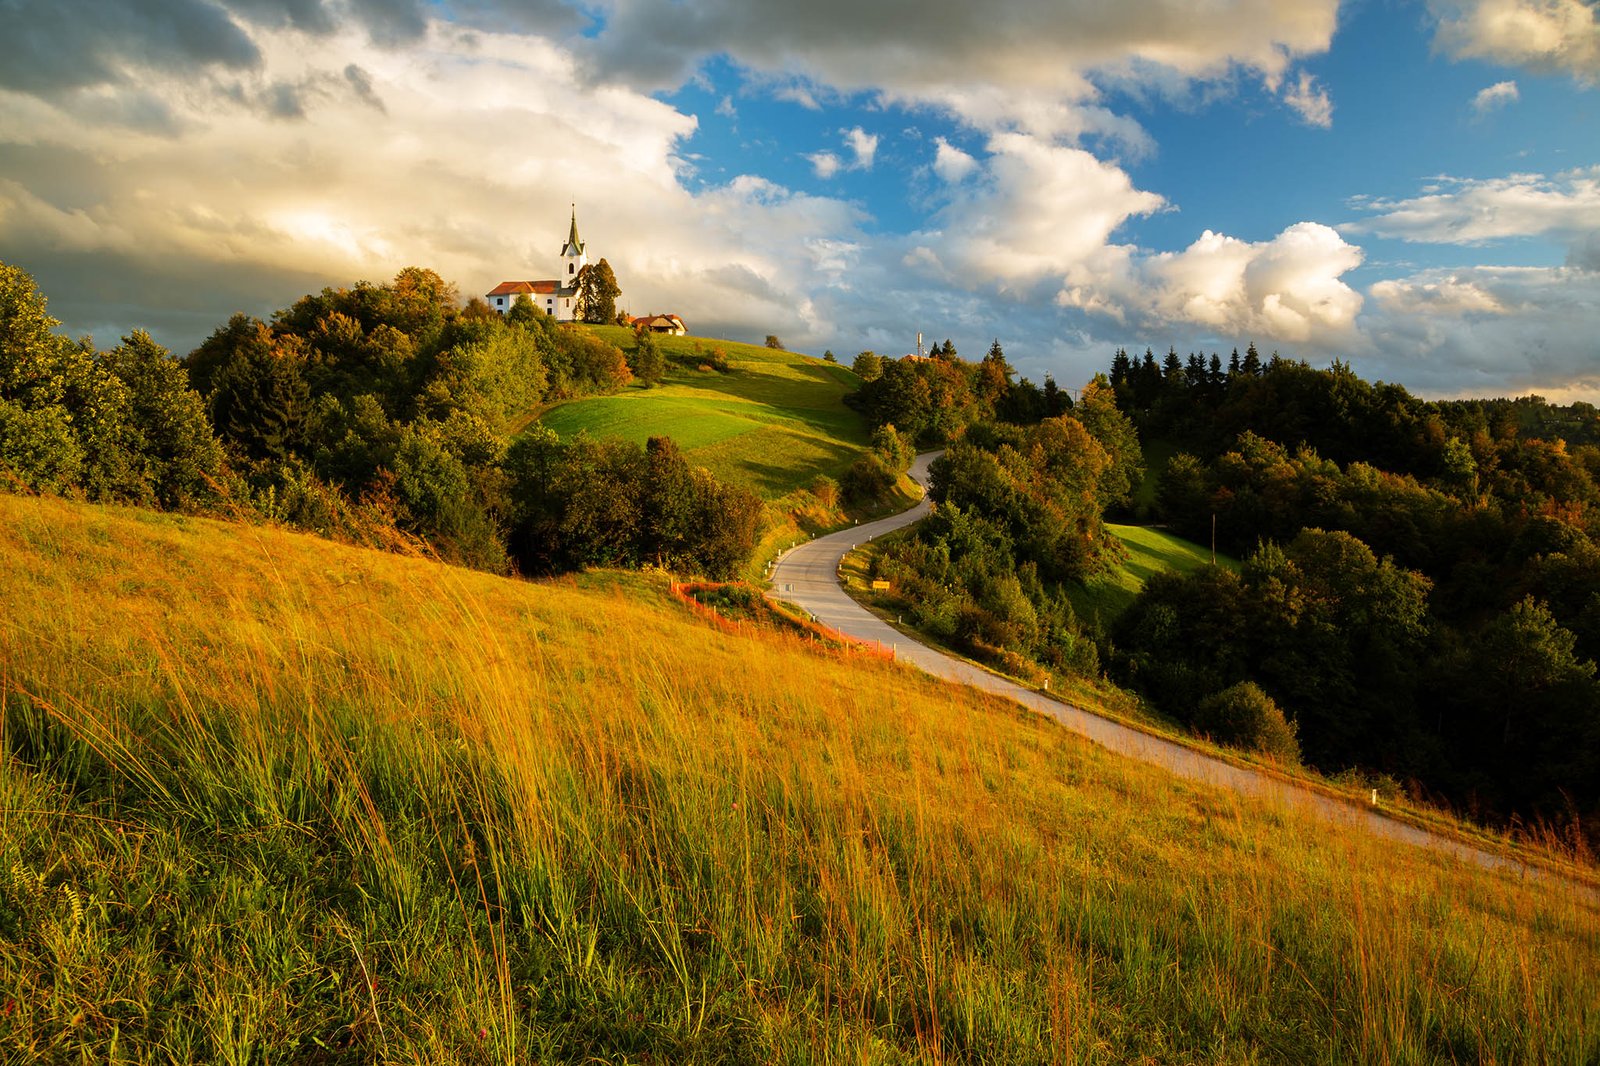 The church of Saint Margaret (Sveta Marjeta) at sunset in autumn. This church sits on a hill in the village of Prezganje in the hills to the east of Ljubljana, Slovenia.